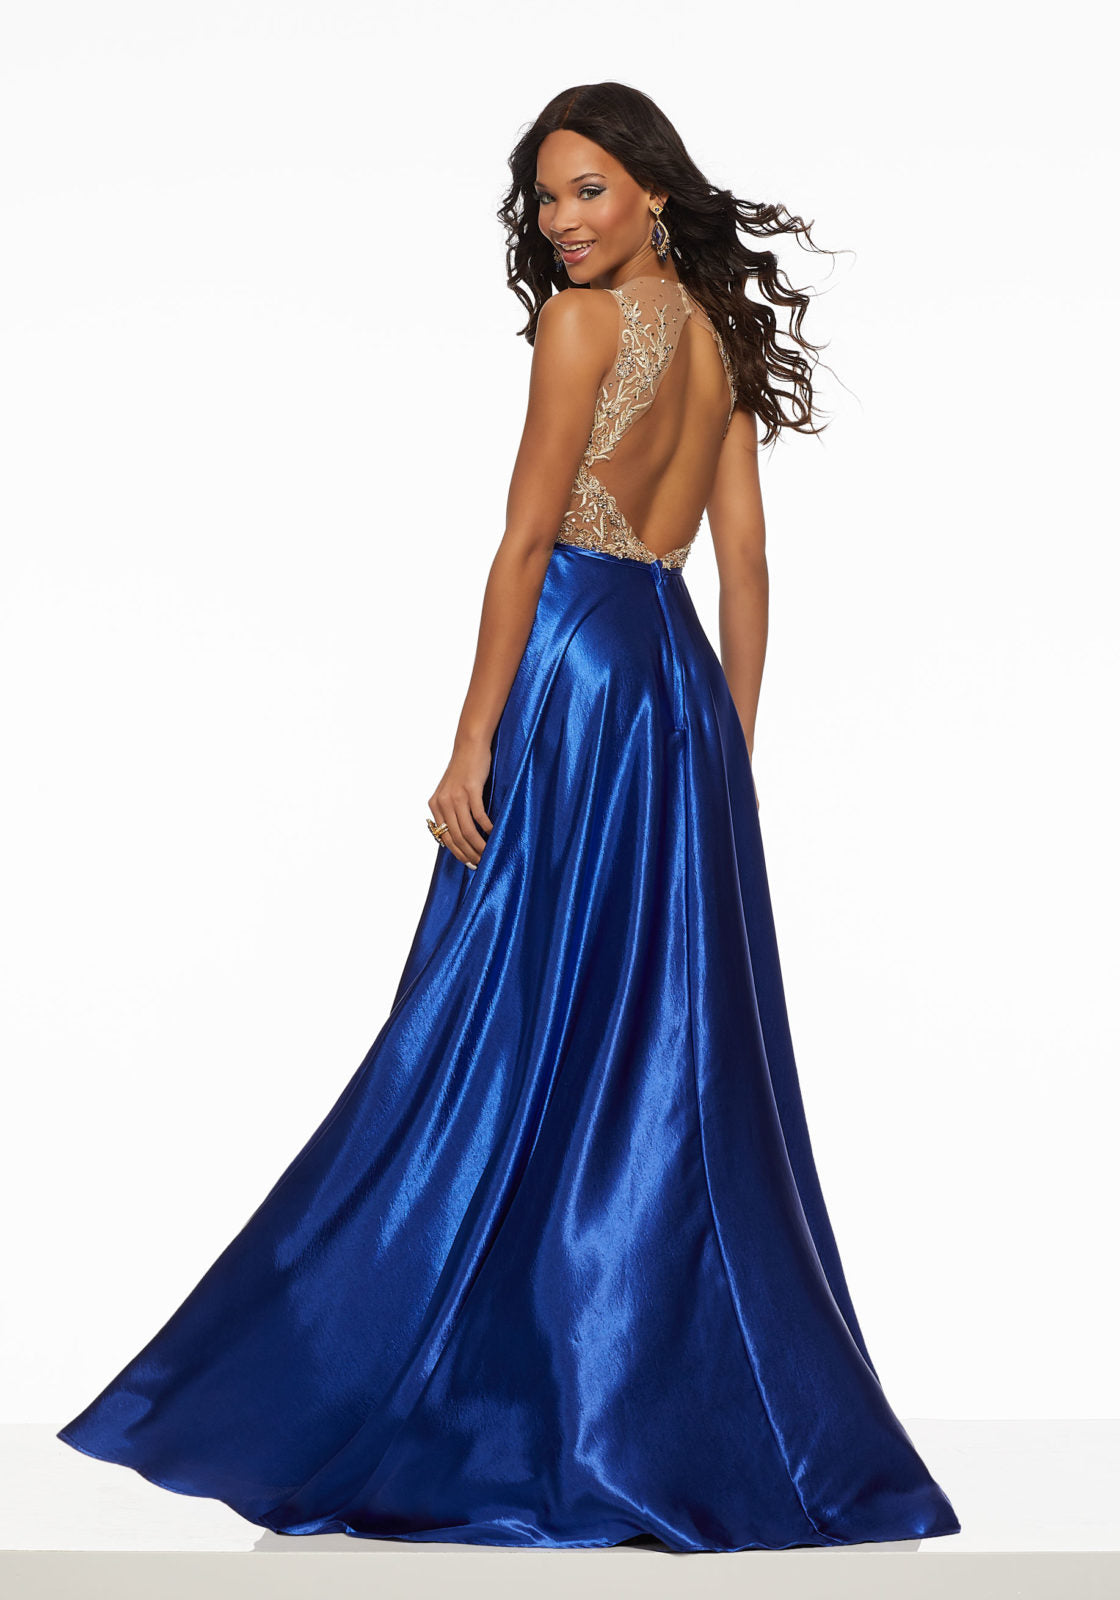 This designer prom dress features an illusion high neckline and an a-line silhouette. Available in royal and red, the natural waistline and beaded embroidery along the bodice compliment the hammered satin skirt. The open back completes the look of this designer prom dress.  Sizes: 00-24  Available in Red, Royal Blue  If we do not have your desired size or color in stock please call or email us for availability!